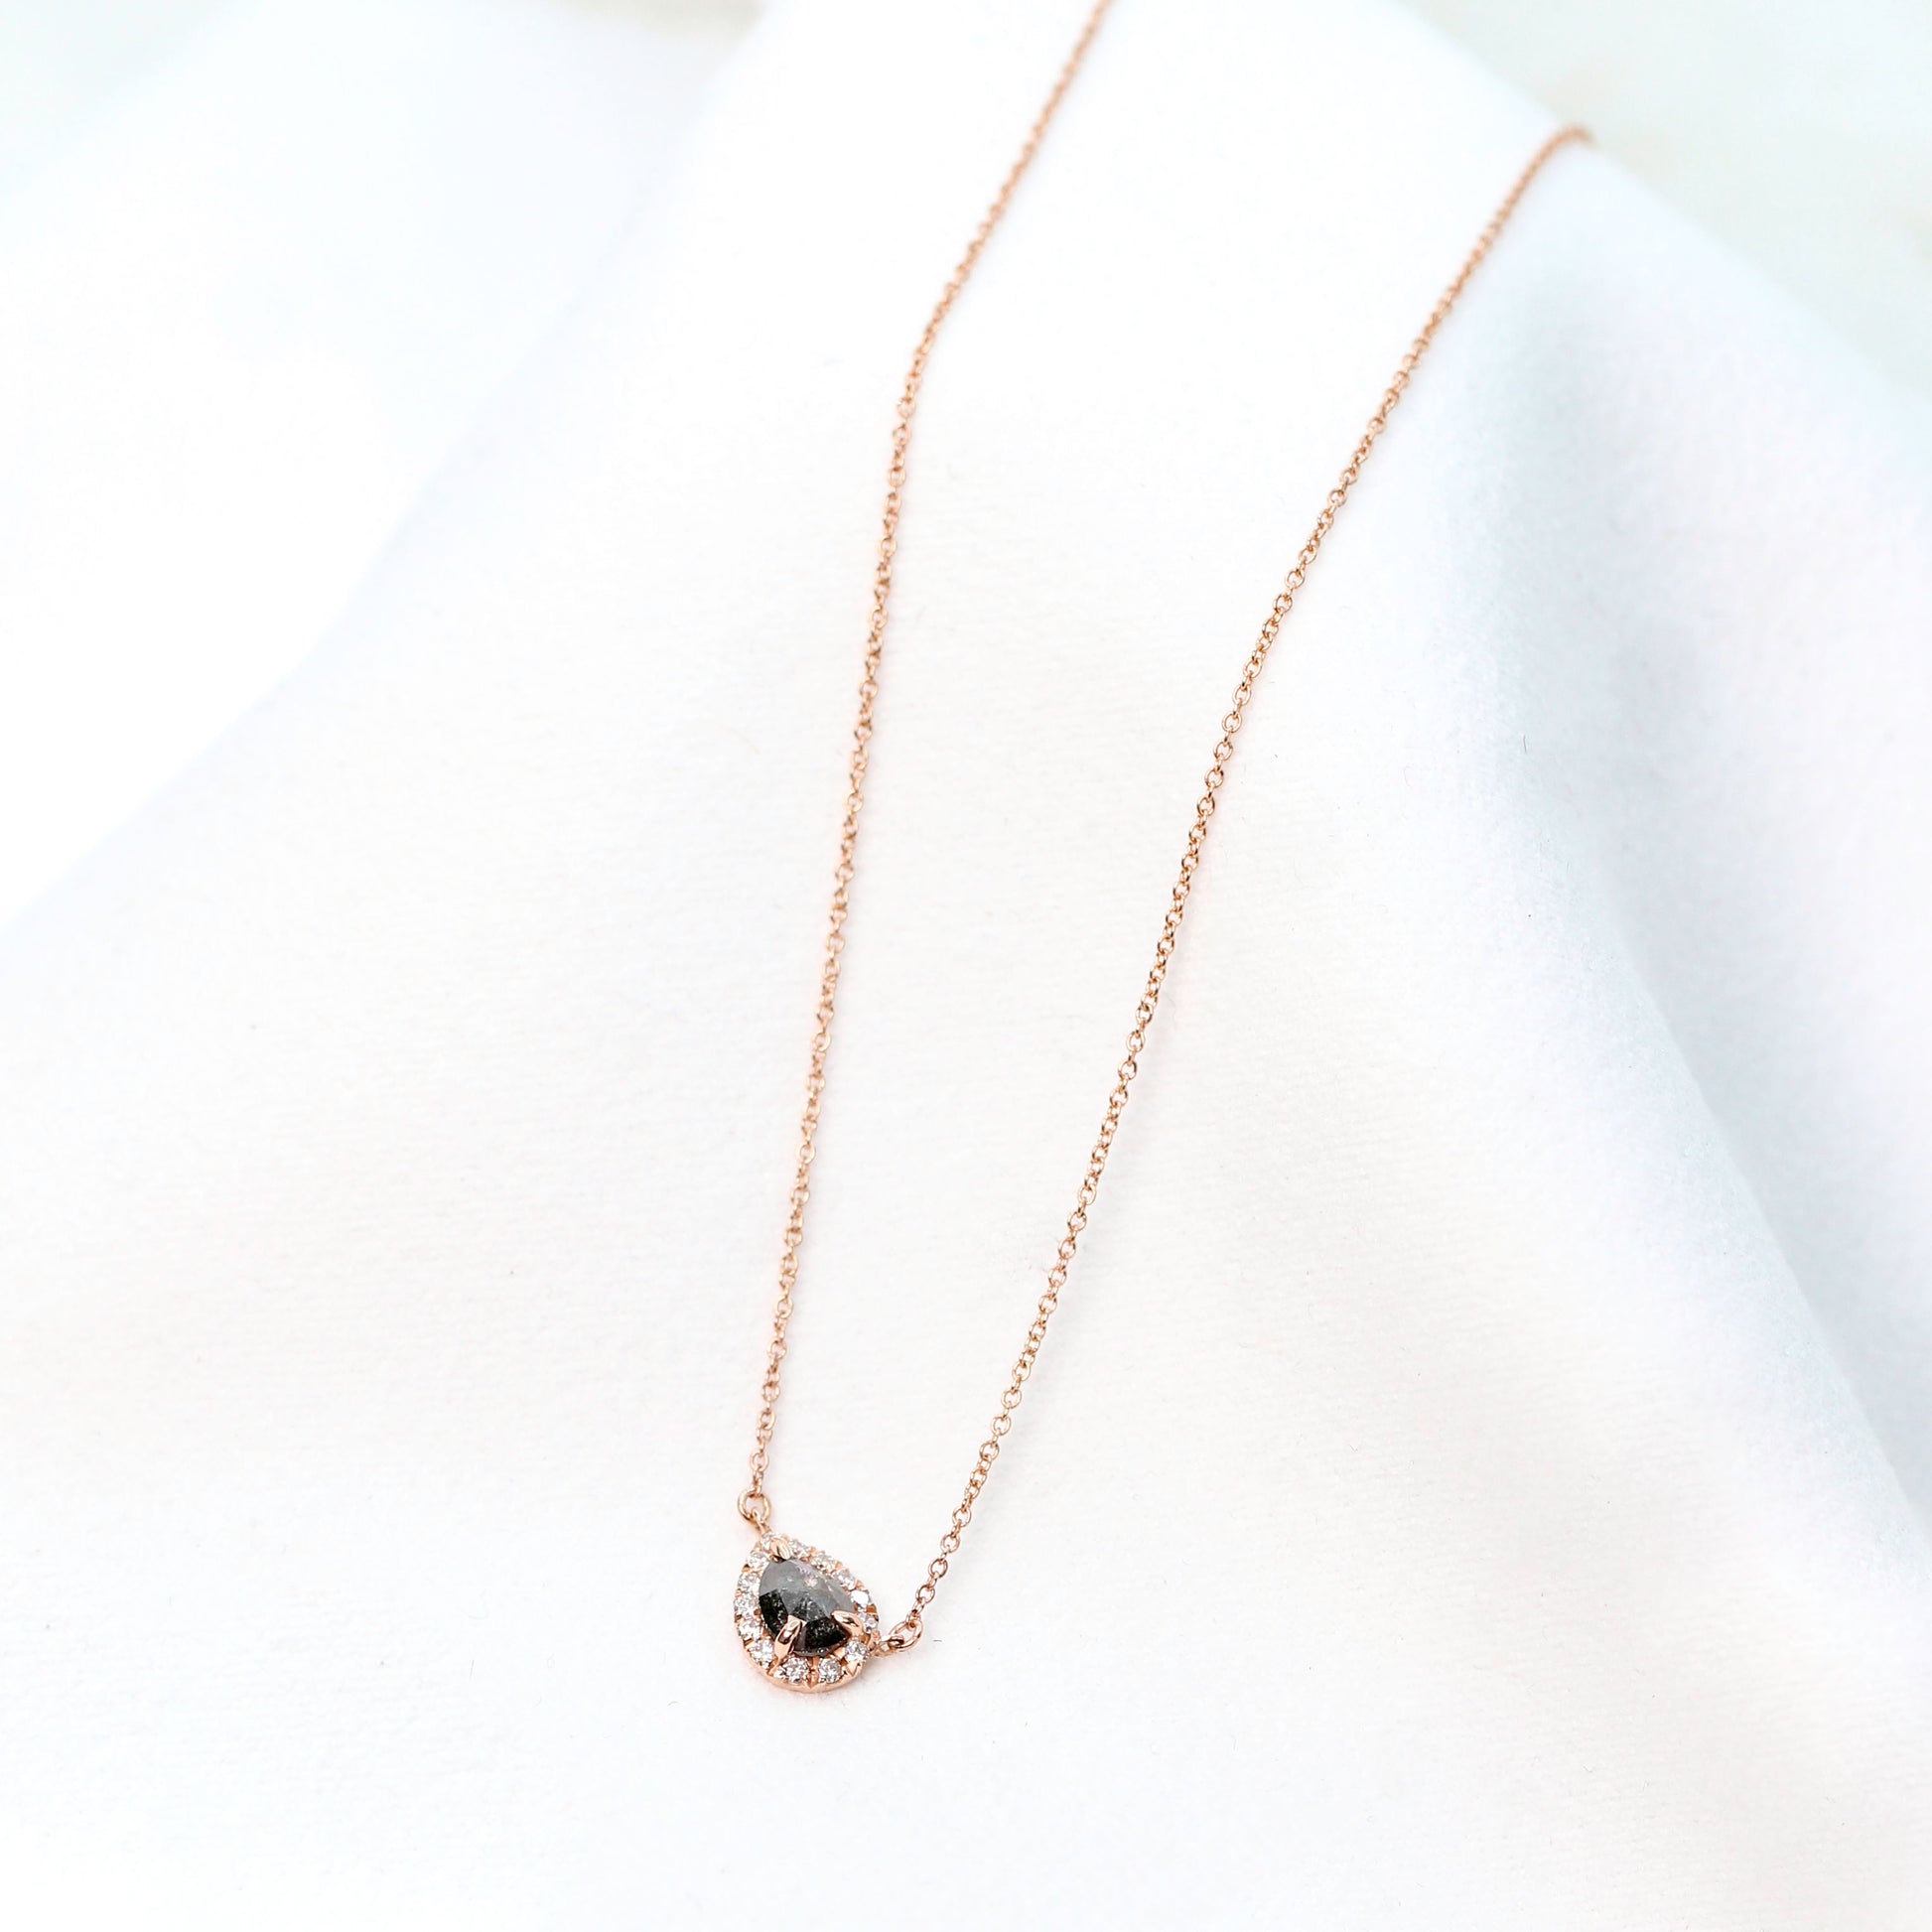 14k Rose Gold Pendant Necklace with a 0.73 Carat Pear Celestial Diamond - Midwinter Co. Alternative Bridal Rings and Modern Fine Jewelry